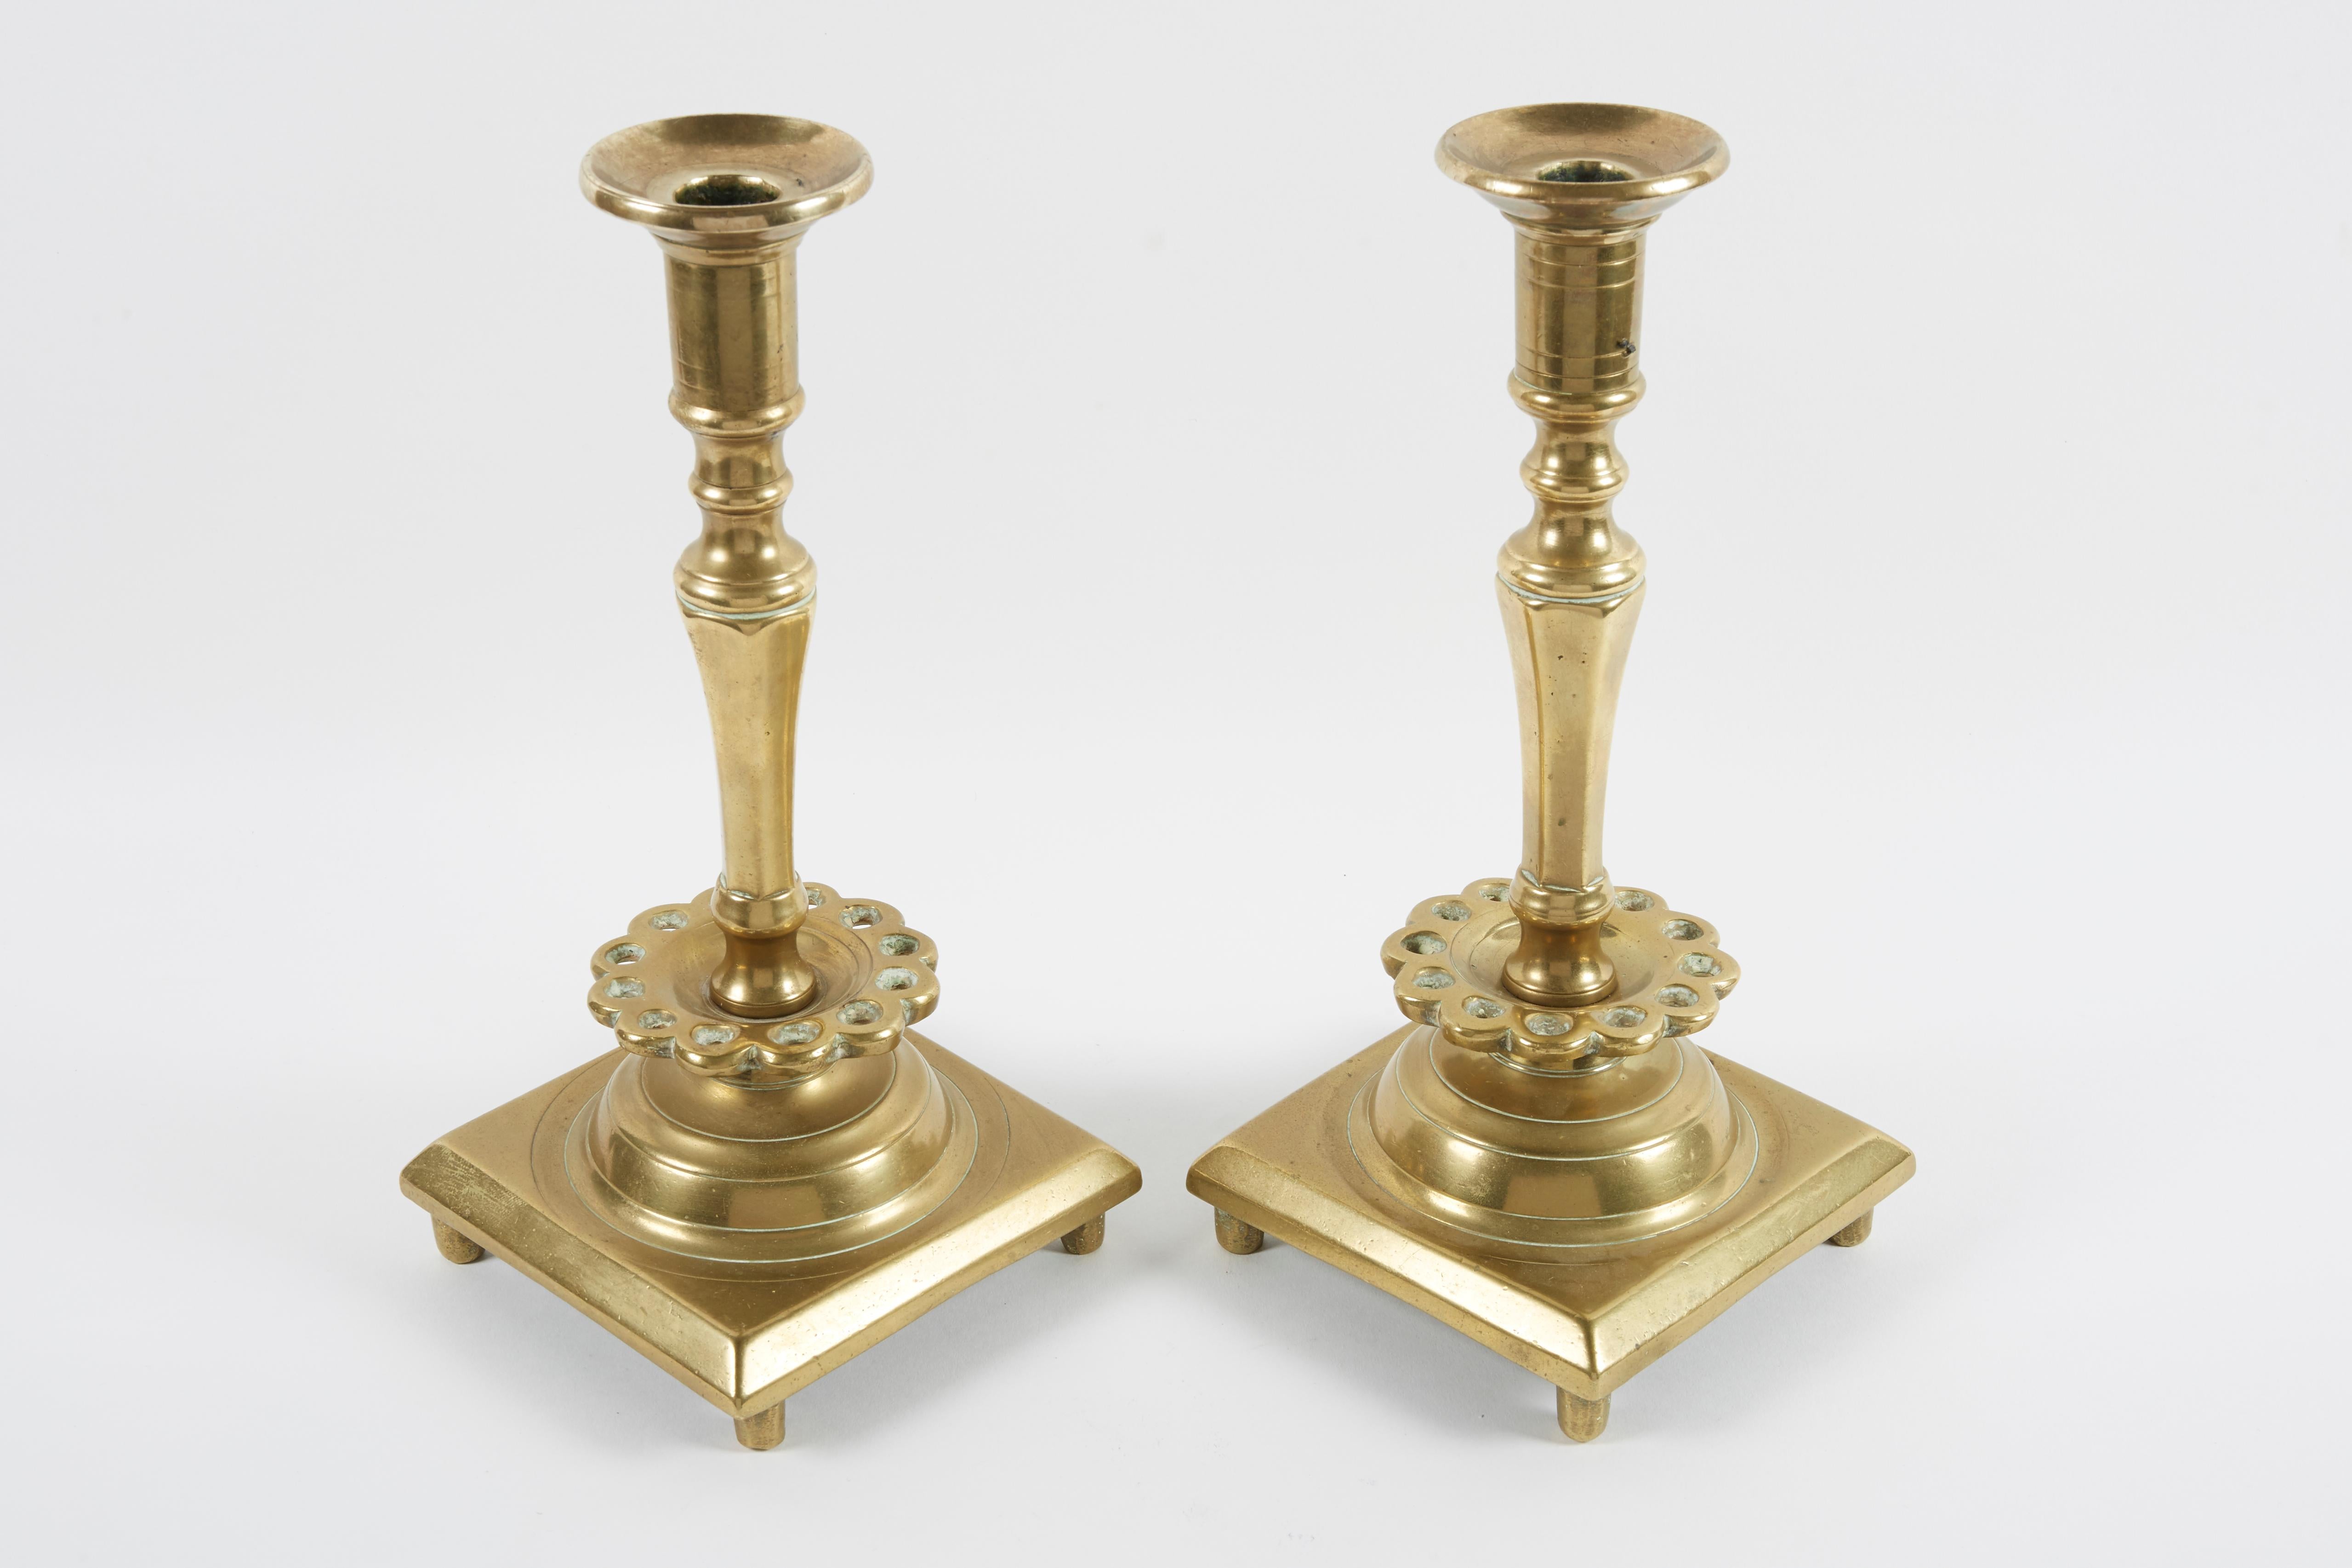 Early pair of brass Sabbath candlesticks
Hand-turned, of very heavy construction, each resting on four peg feet.
Russia, circa 1700.
For the Jews located in the large swath of territory known as the “Pale of
the Settlement”, candlesticks such as